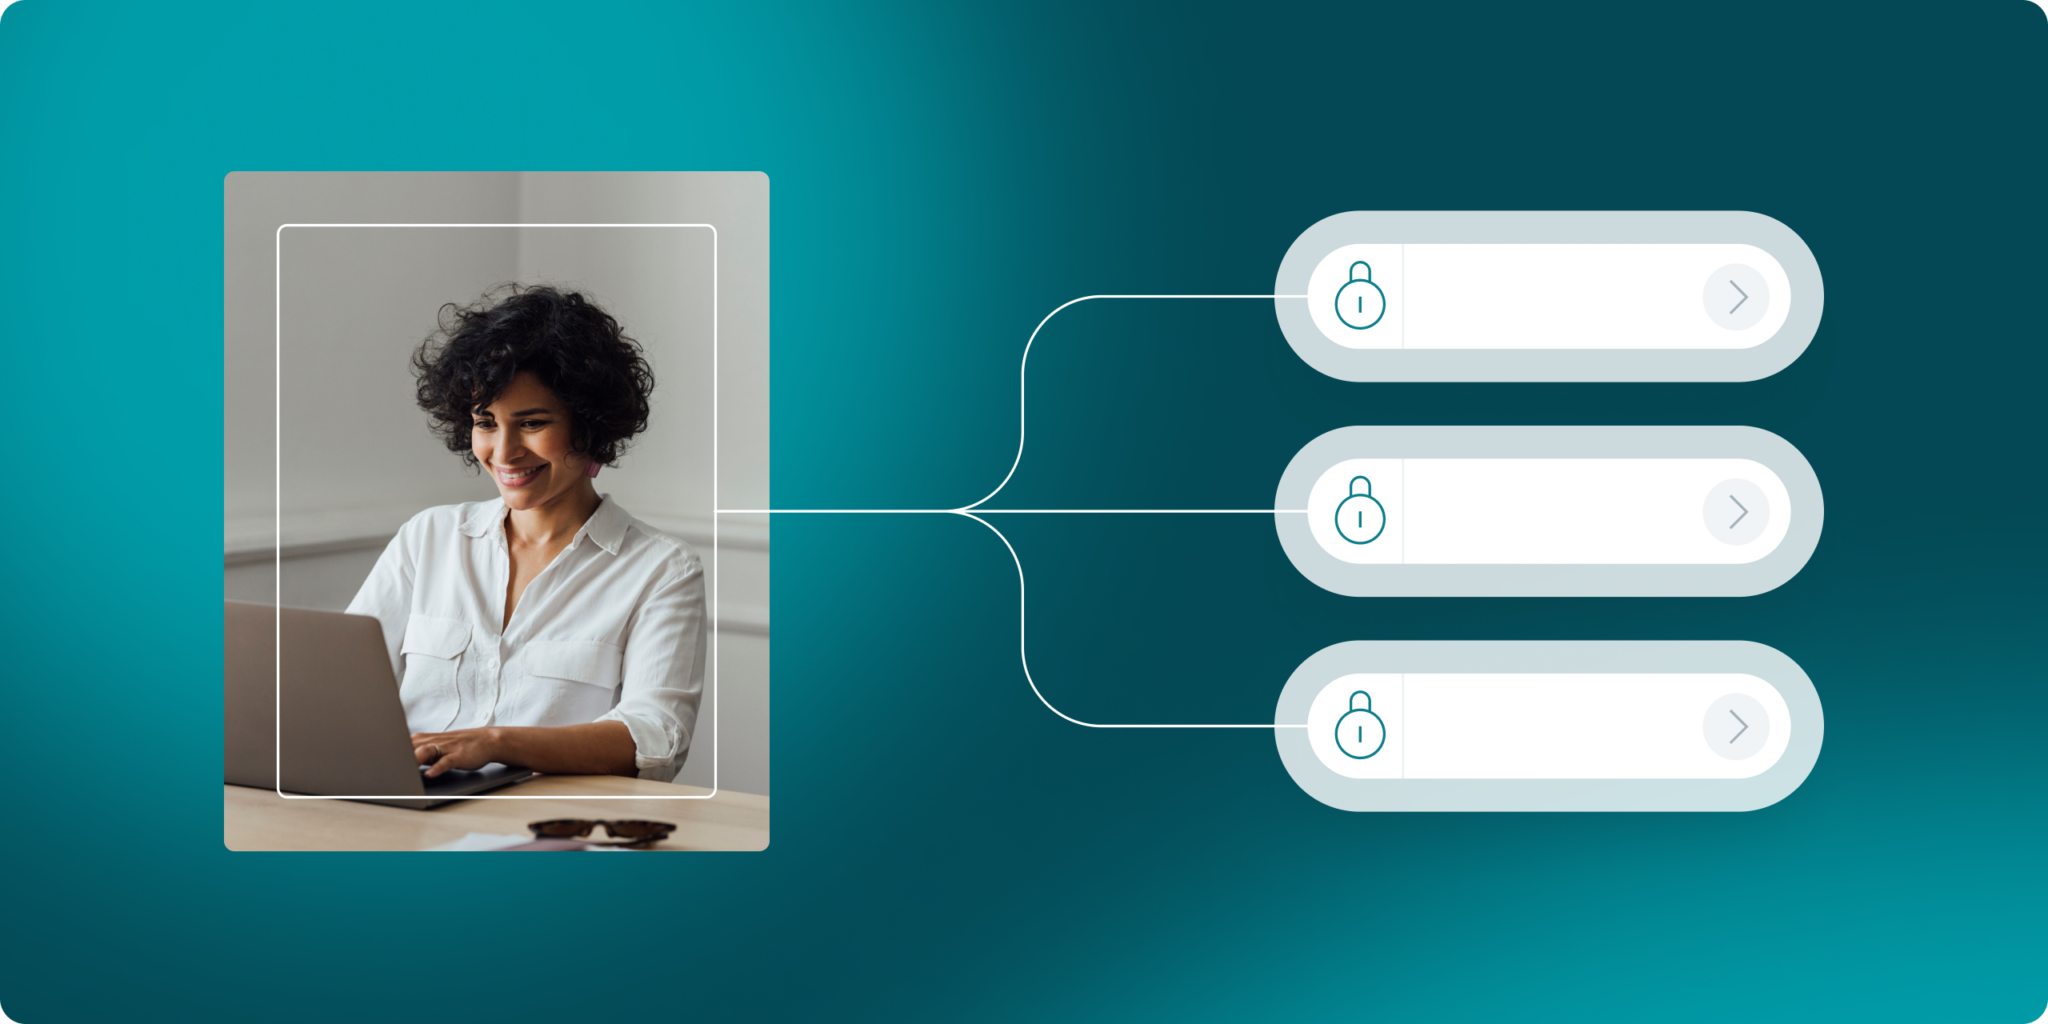 Graphic with a blue gradient background featuring an image of a woman on her laptop connected to three login fields, representing the secure enclaves that power Dashlane’s Confidential SSO &amp; Provisioning integrations